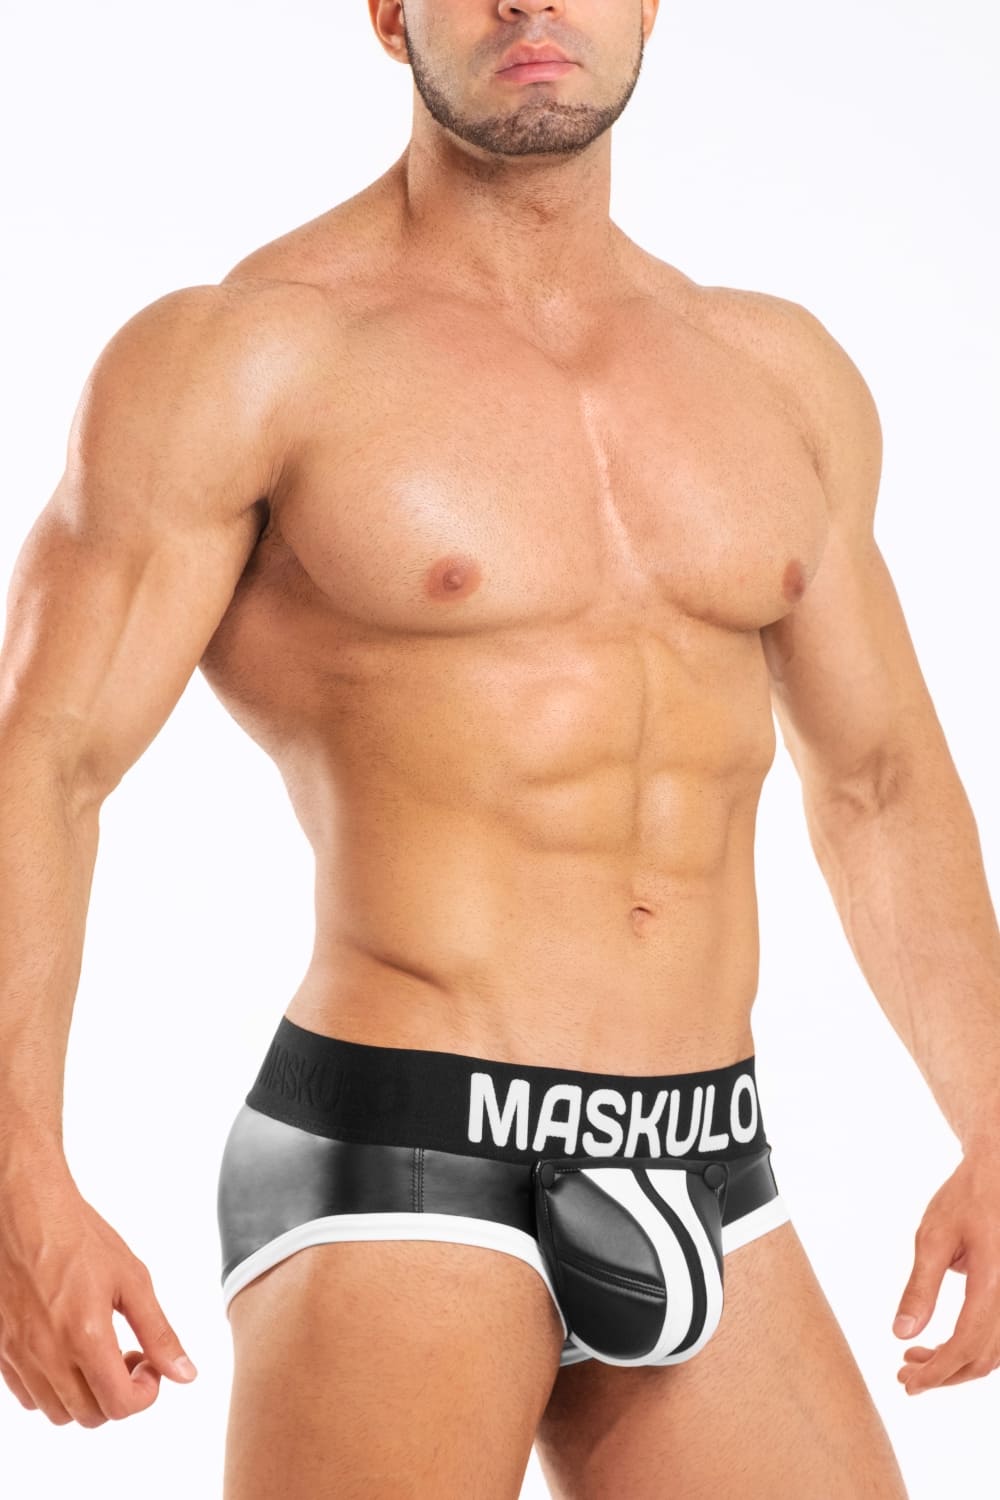 Basic Briefs with Pouch Snap. Black+White